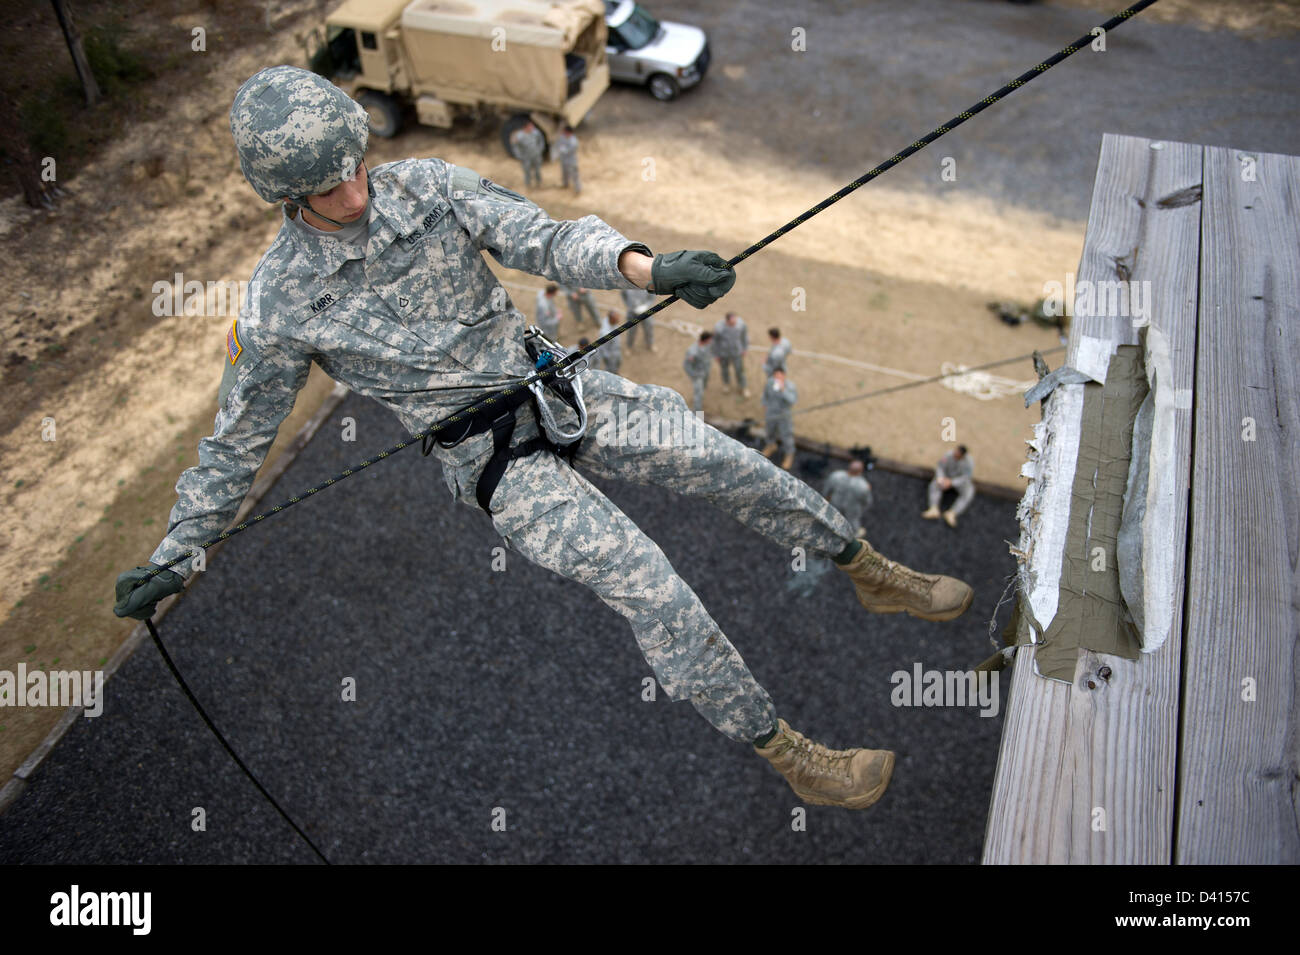 US Green Beret Special Forces soldiers starts to rappel down a 40-foot training tower February 4, 2013 at Eglin Base Air Force Base, Florida. Green Berets practiced descending a 40-foot rope and a 40-foot rappelling wall. Stock Photo